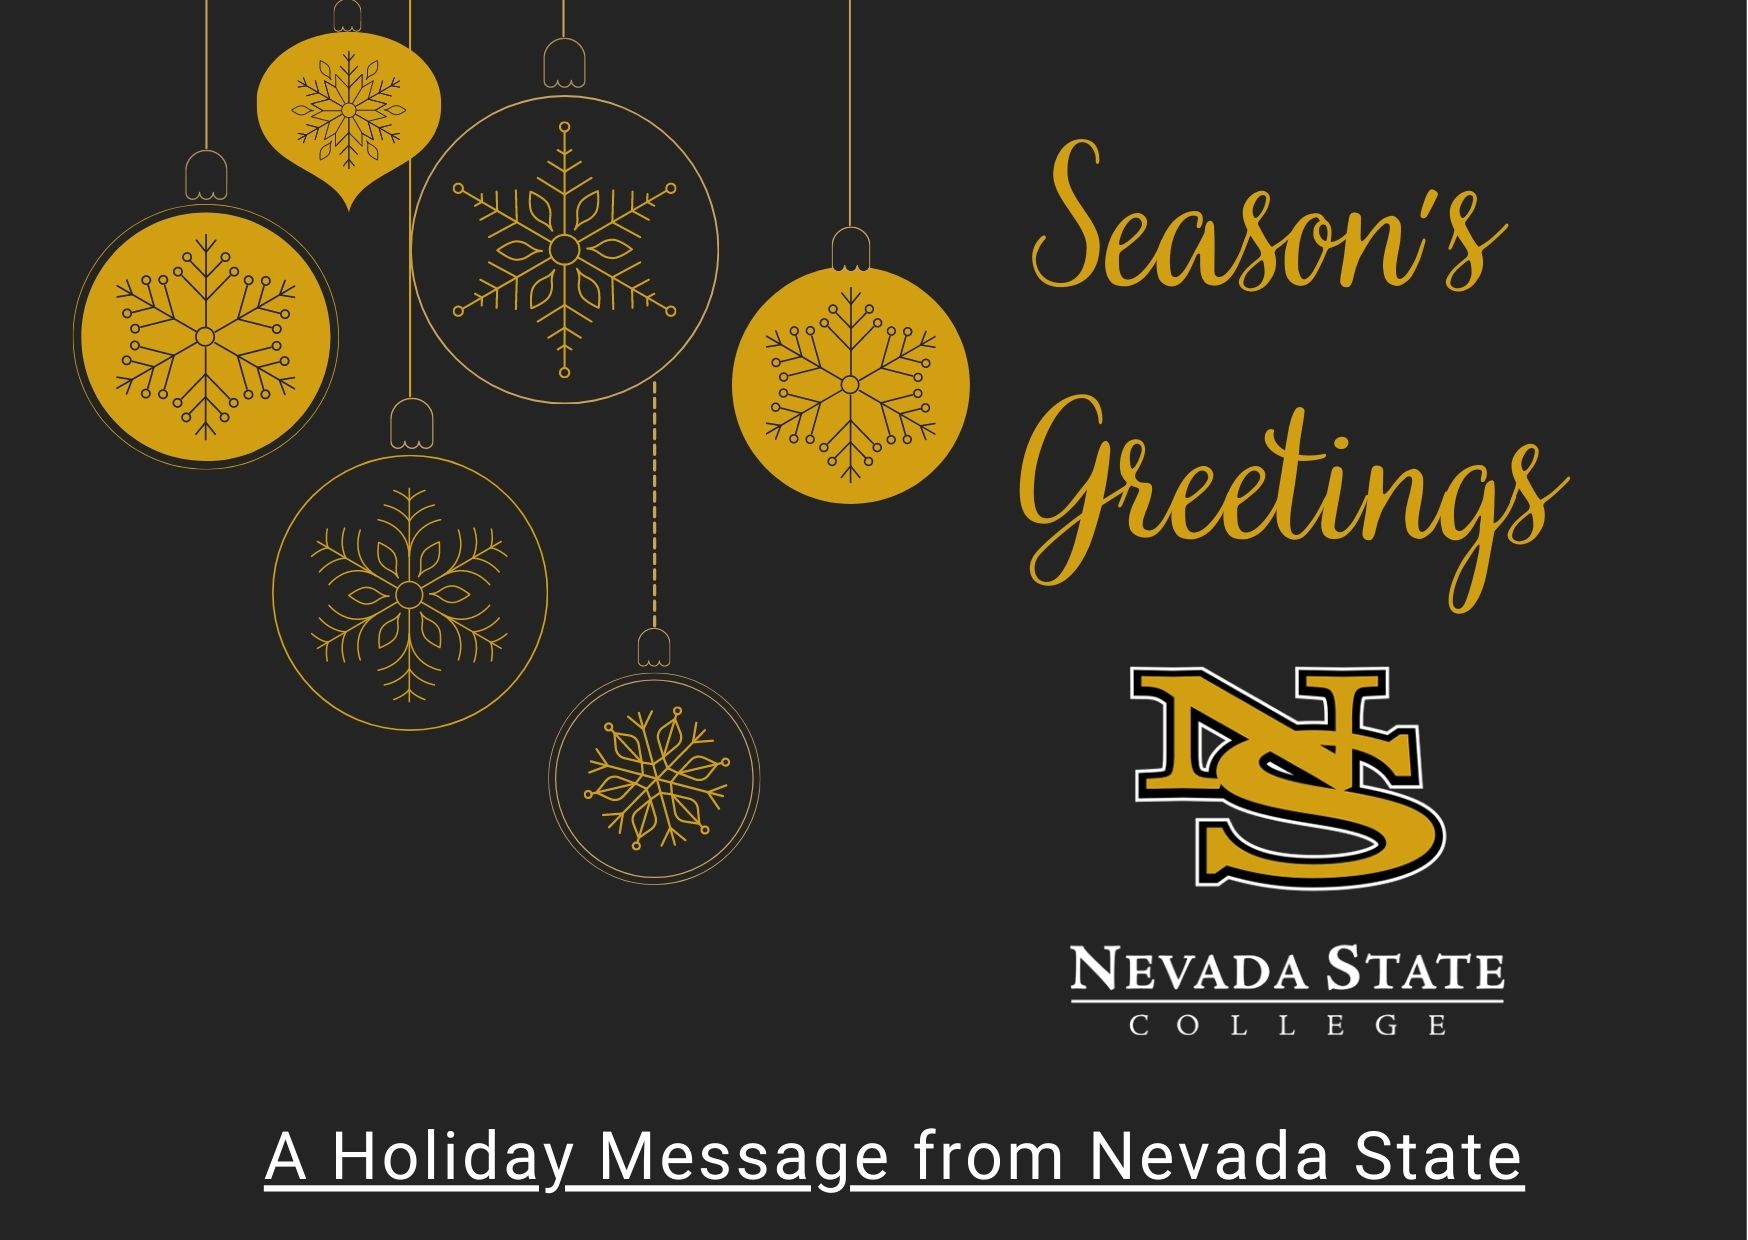 A Seasons Greetings, a Holiday Message from Nevada State